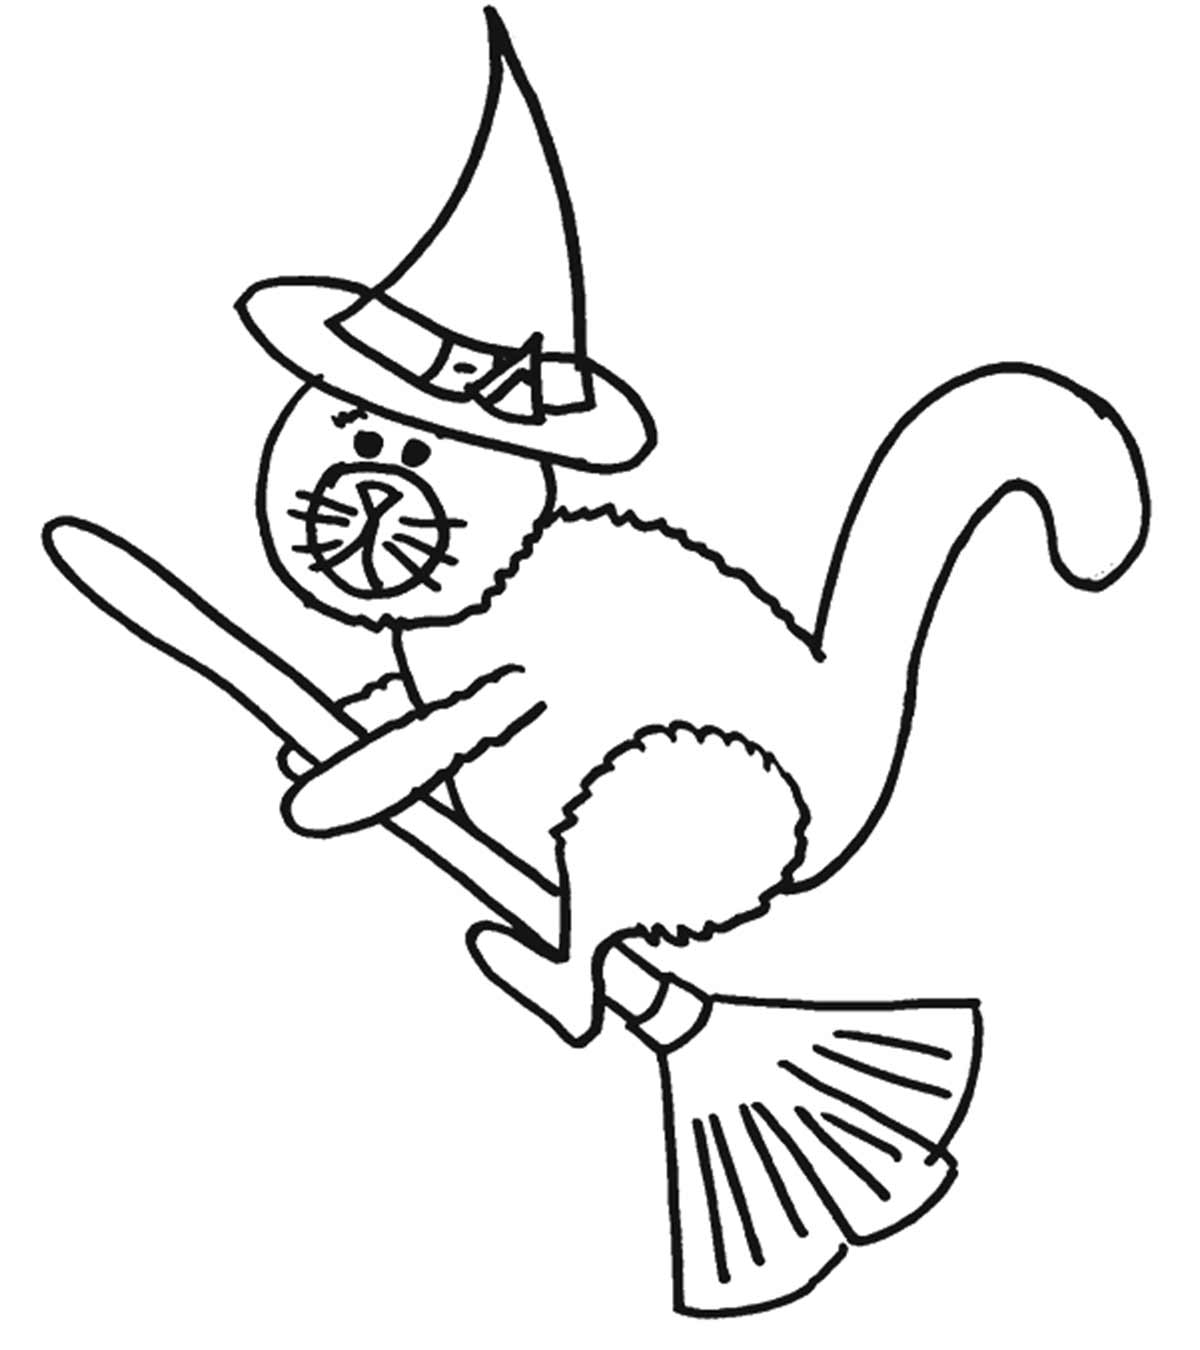 Download Holiday Coloring Pages - MomJunction